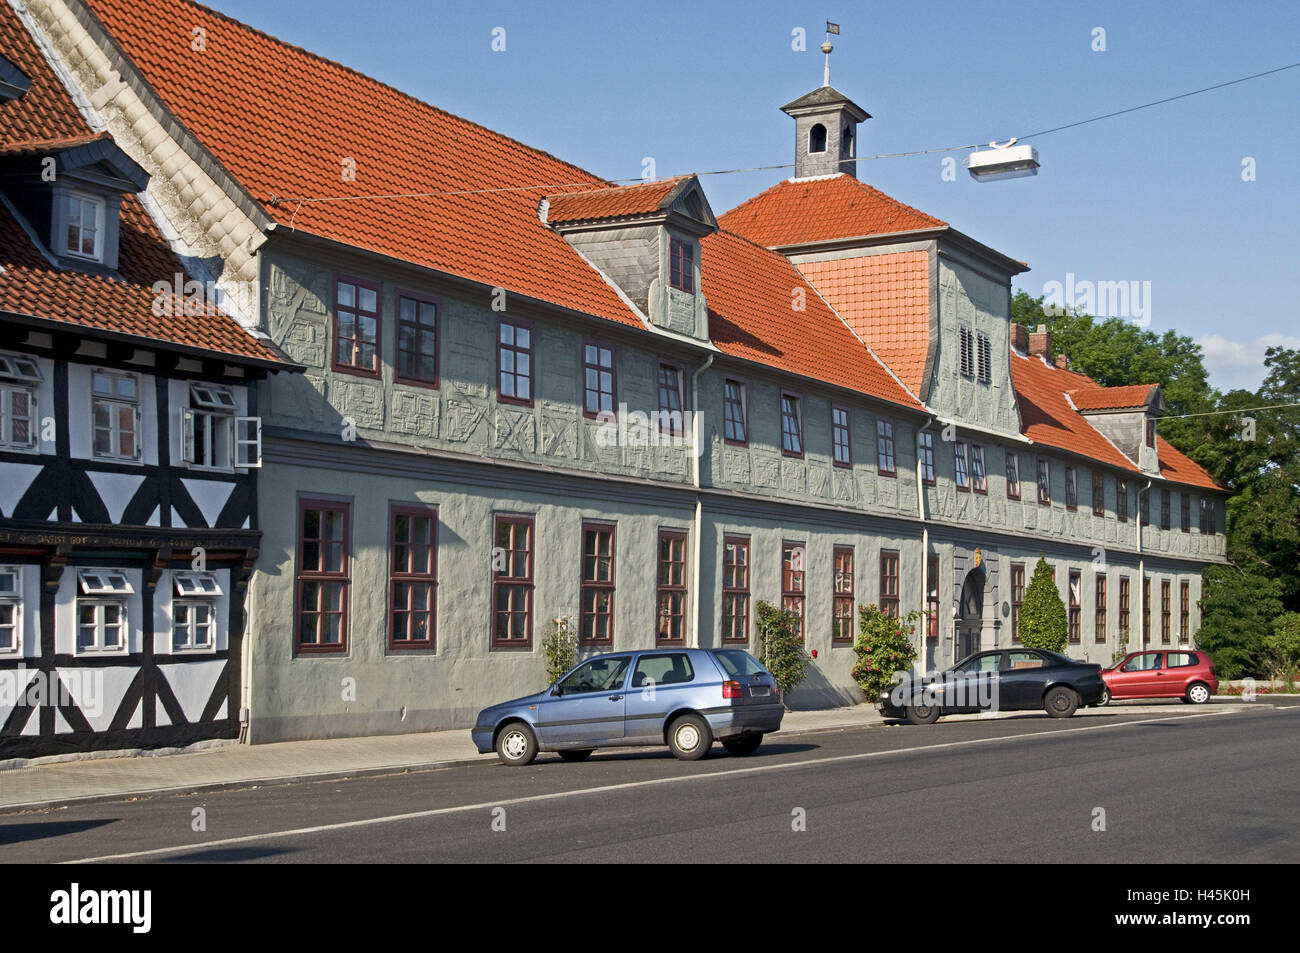 Germany, Lower Saxony, Wolfenbüttel, orphanage, outside, August town, town, house, building, cars, vehicles, park, architectural style, nobody, Stock Photo